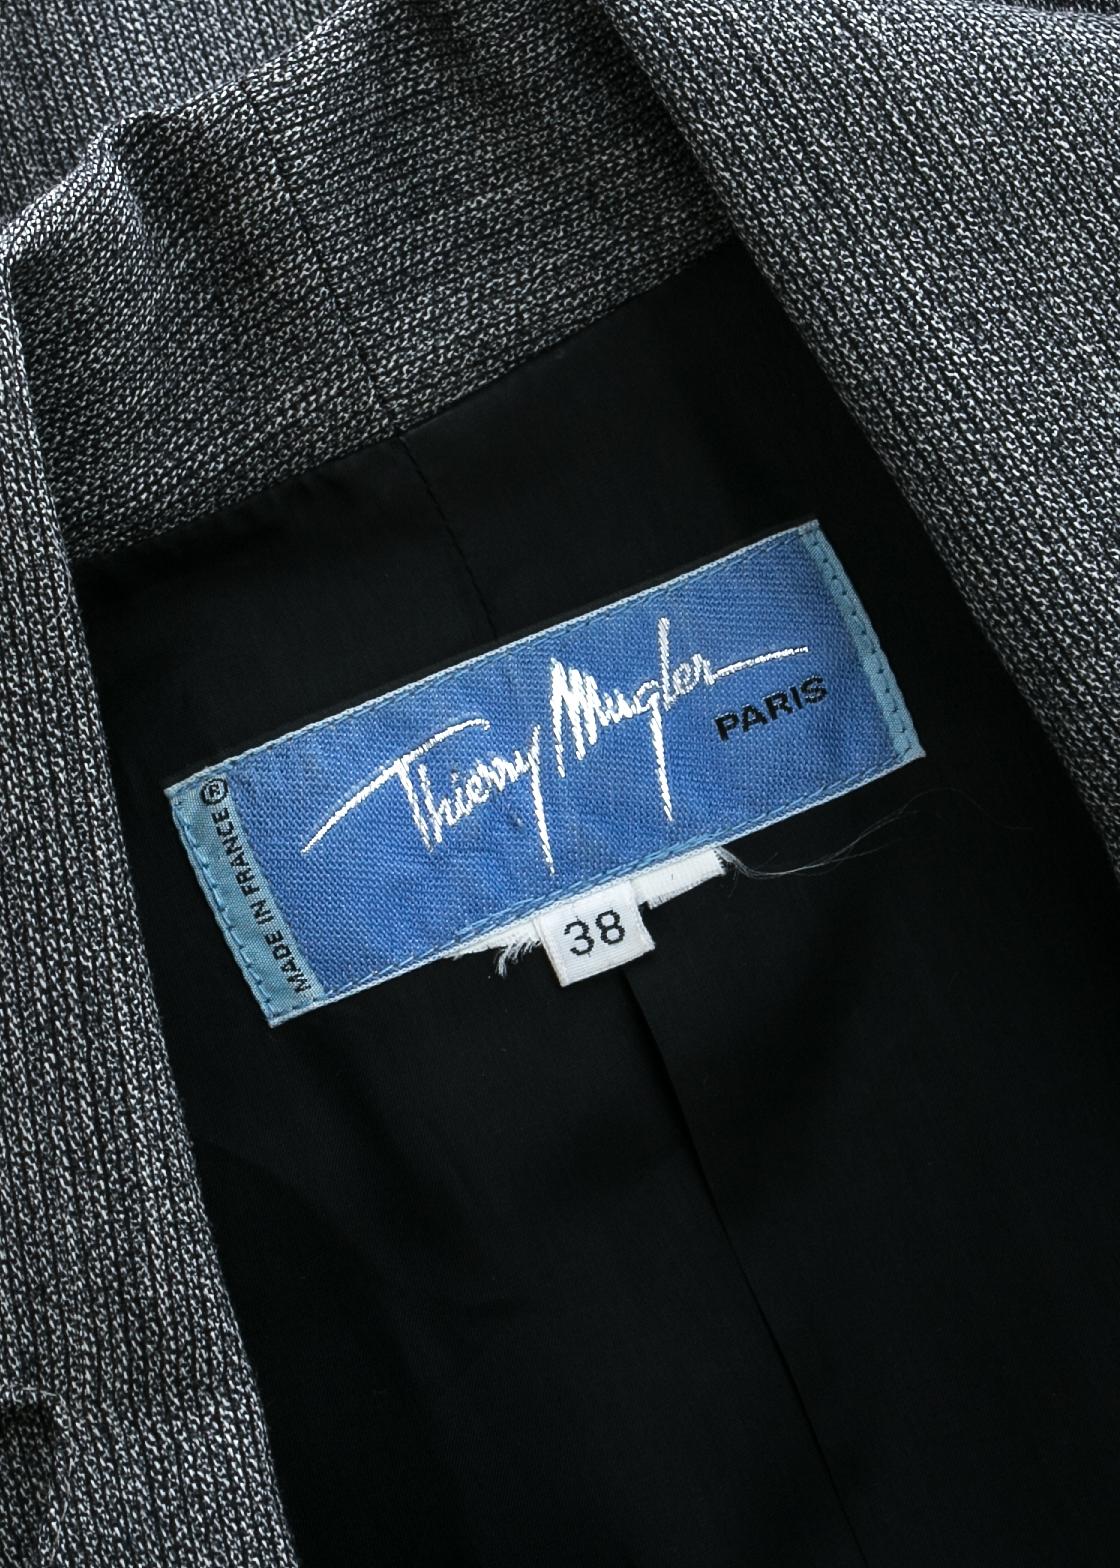 Thierry Mugler grey wool structured skirt suit, c. 1990s In Good Condition For Sale In London, GB